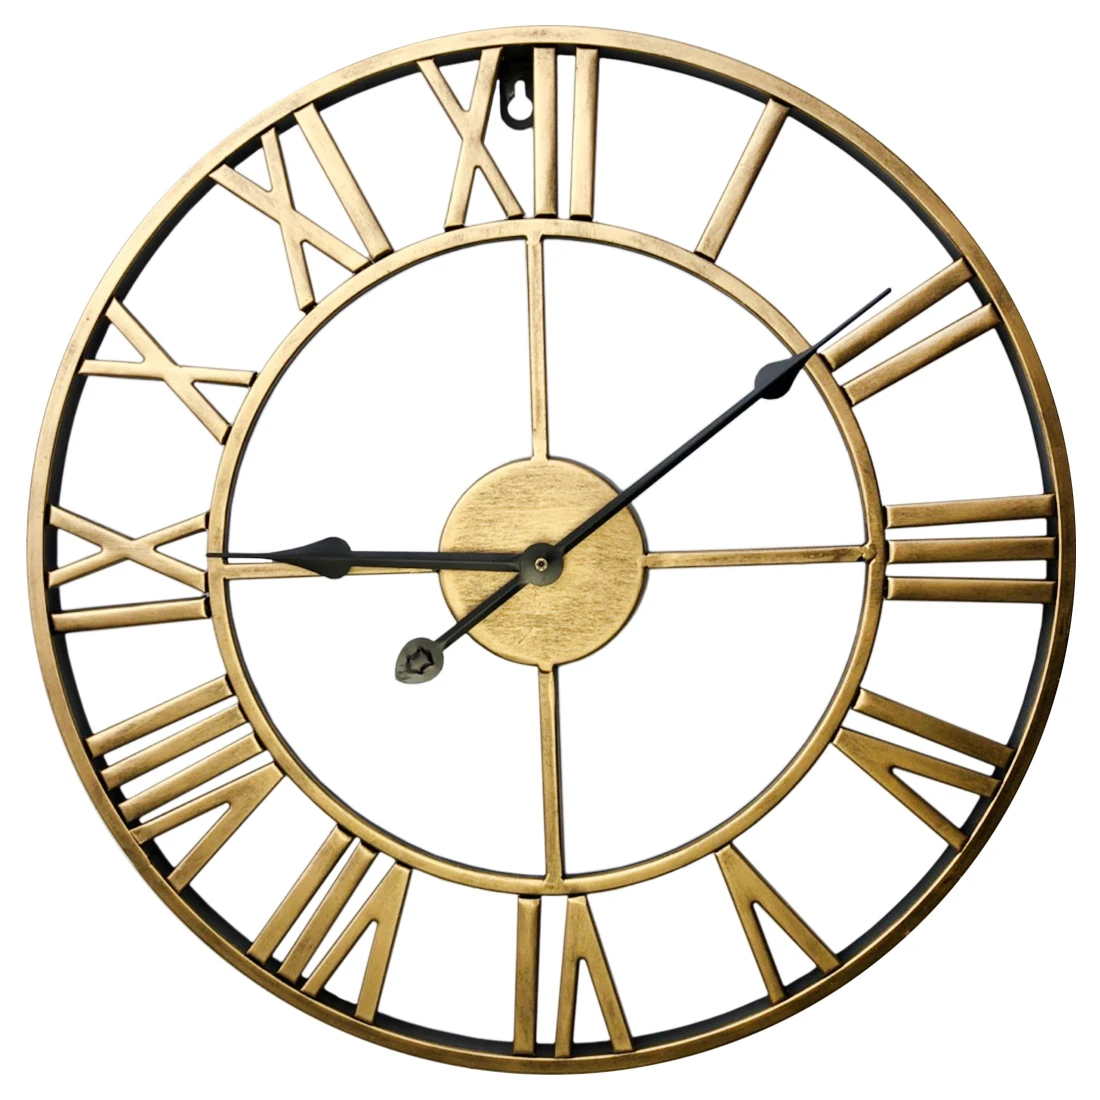 

60cm Creative Wall Clock Retro Iron Roman Numerals Mute Wall Clock Battery Operated Round Wall Clock For Living Room Decor